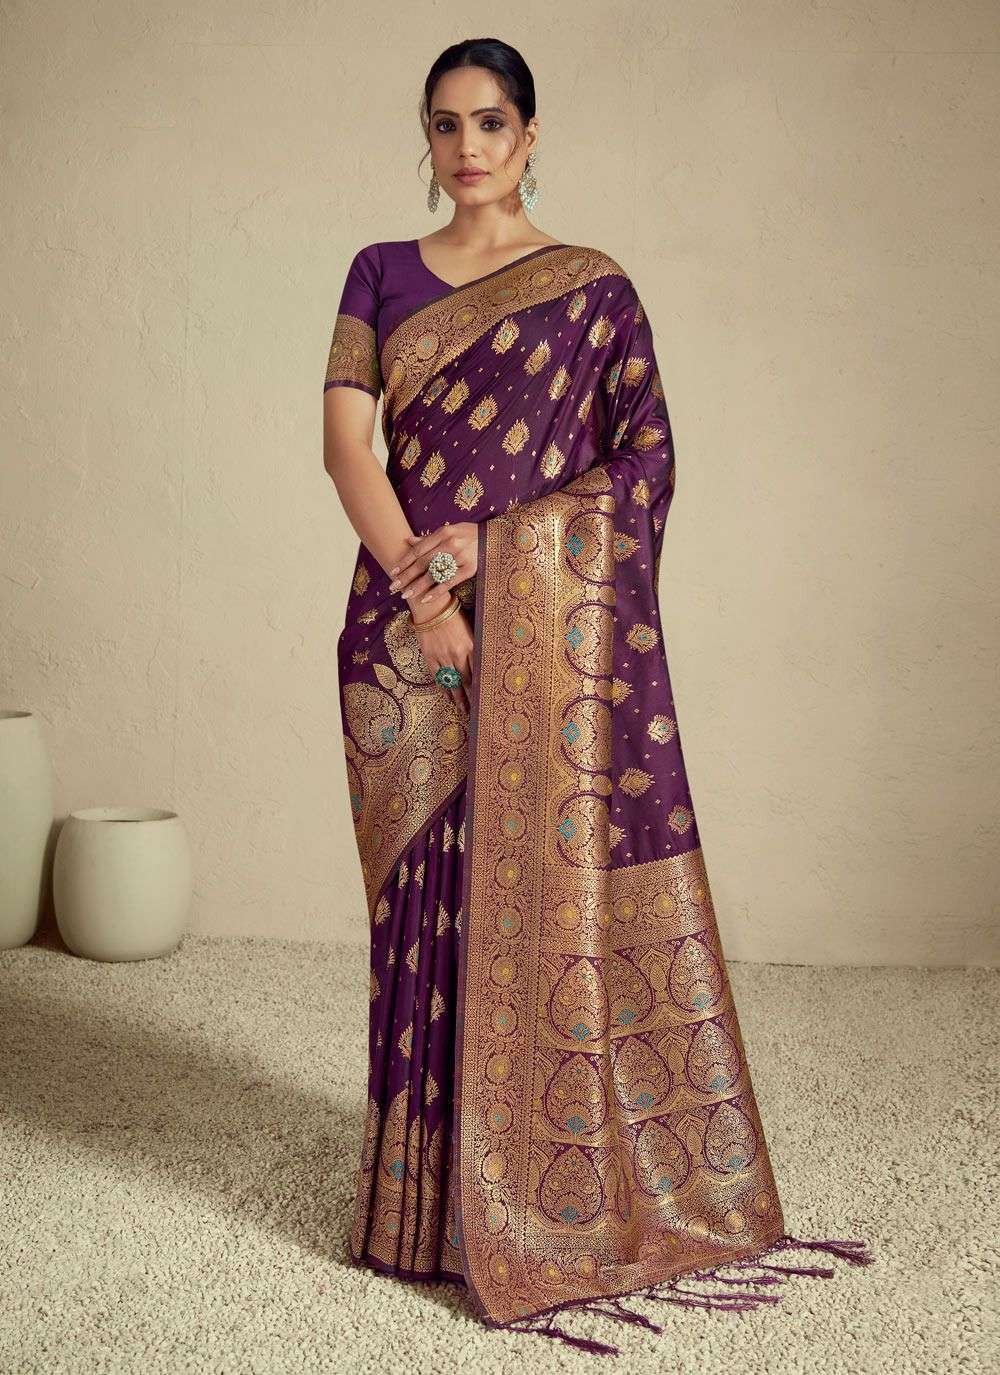 Sangam Prints Bunawat Pulkit  SILK WITH WEAVING ALL OUR SARE...